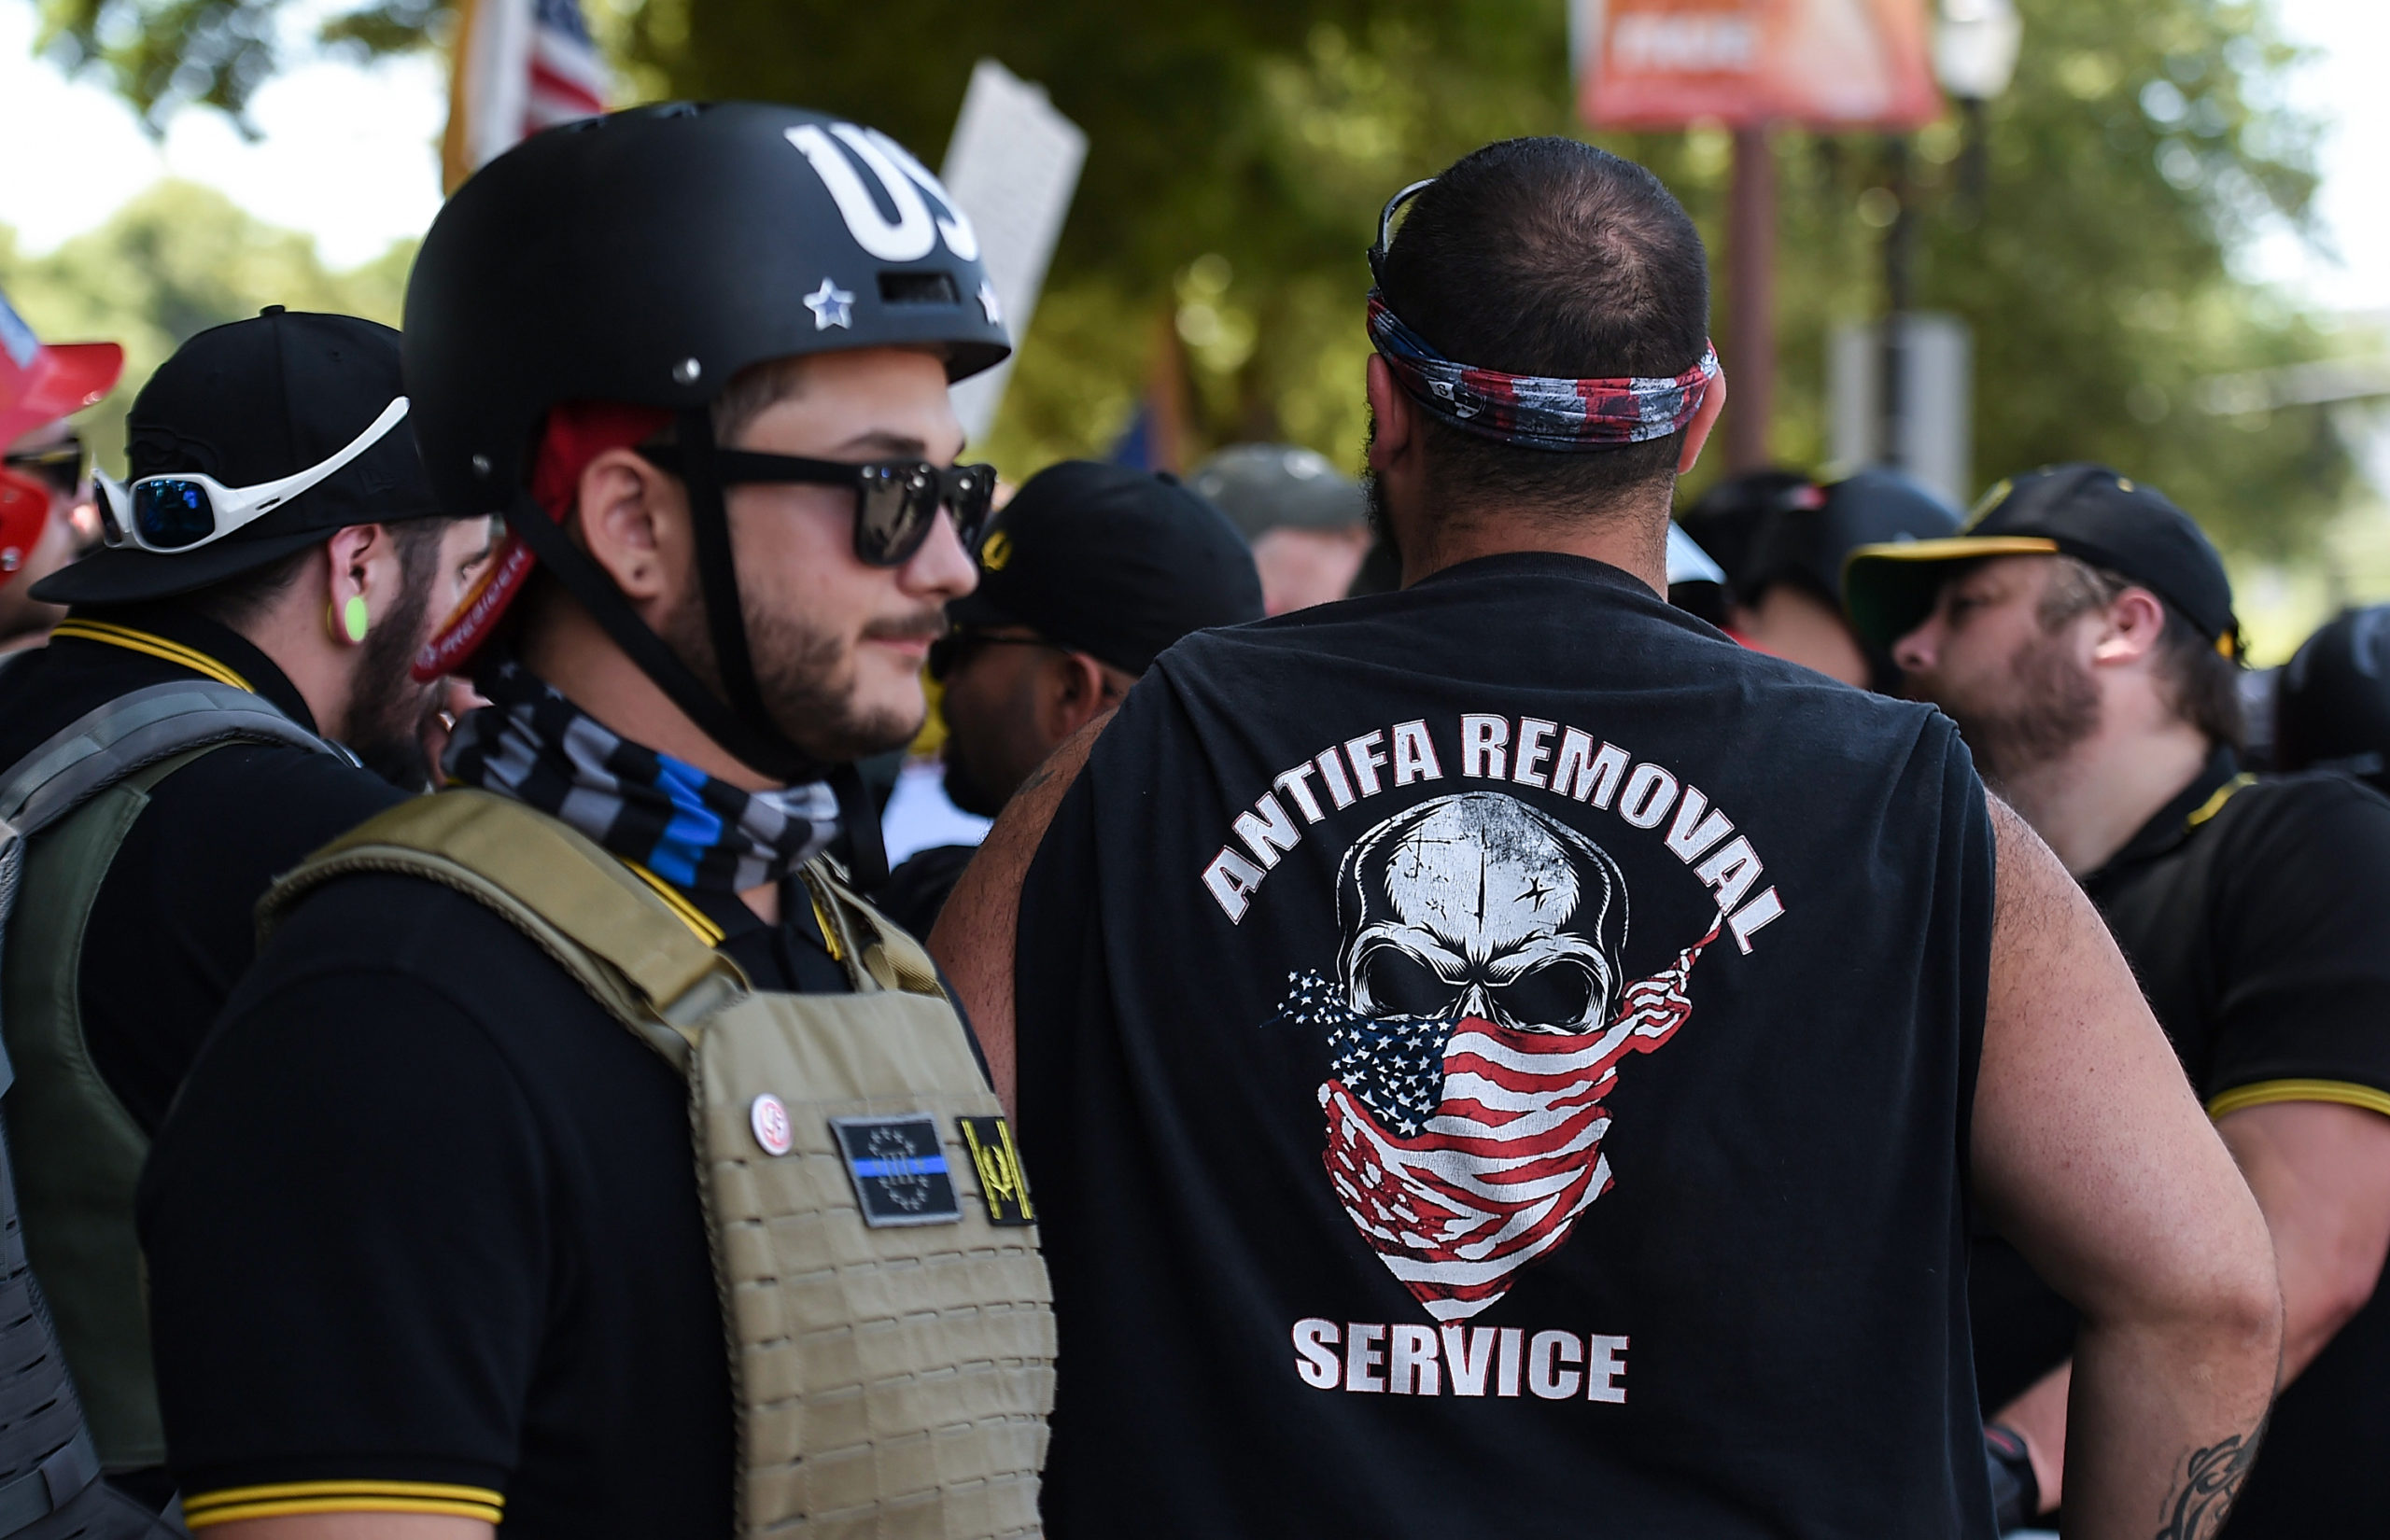 PORTLAND, OR - AUGUST 04:  Members of Patriot Prayer demonstrate during the Alt Right Rally at Tom McCall Waterfront Park on August 4, 2018 in Portland, Oregon. The Rally also brought opposition from Rose City Antifa and other groups. The rally was ultimately broken up by police after elements of the Antifa group were broken up by police when some of their members allegedly threw items at law enforcement officials.  (Photo by Steve Dykes/Getty Images)